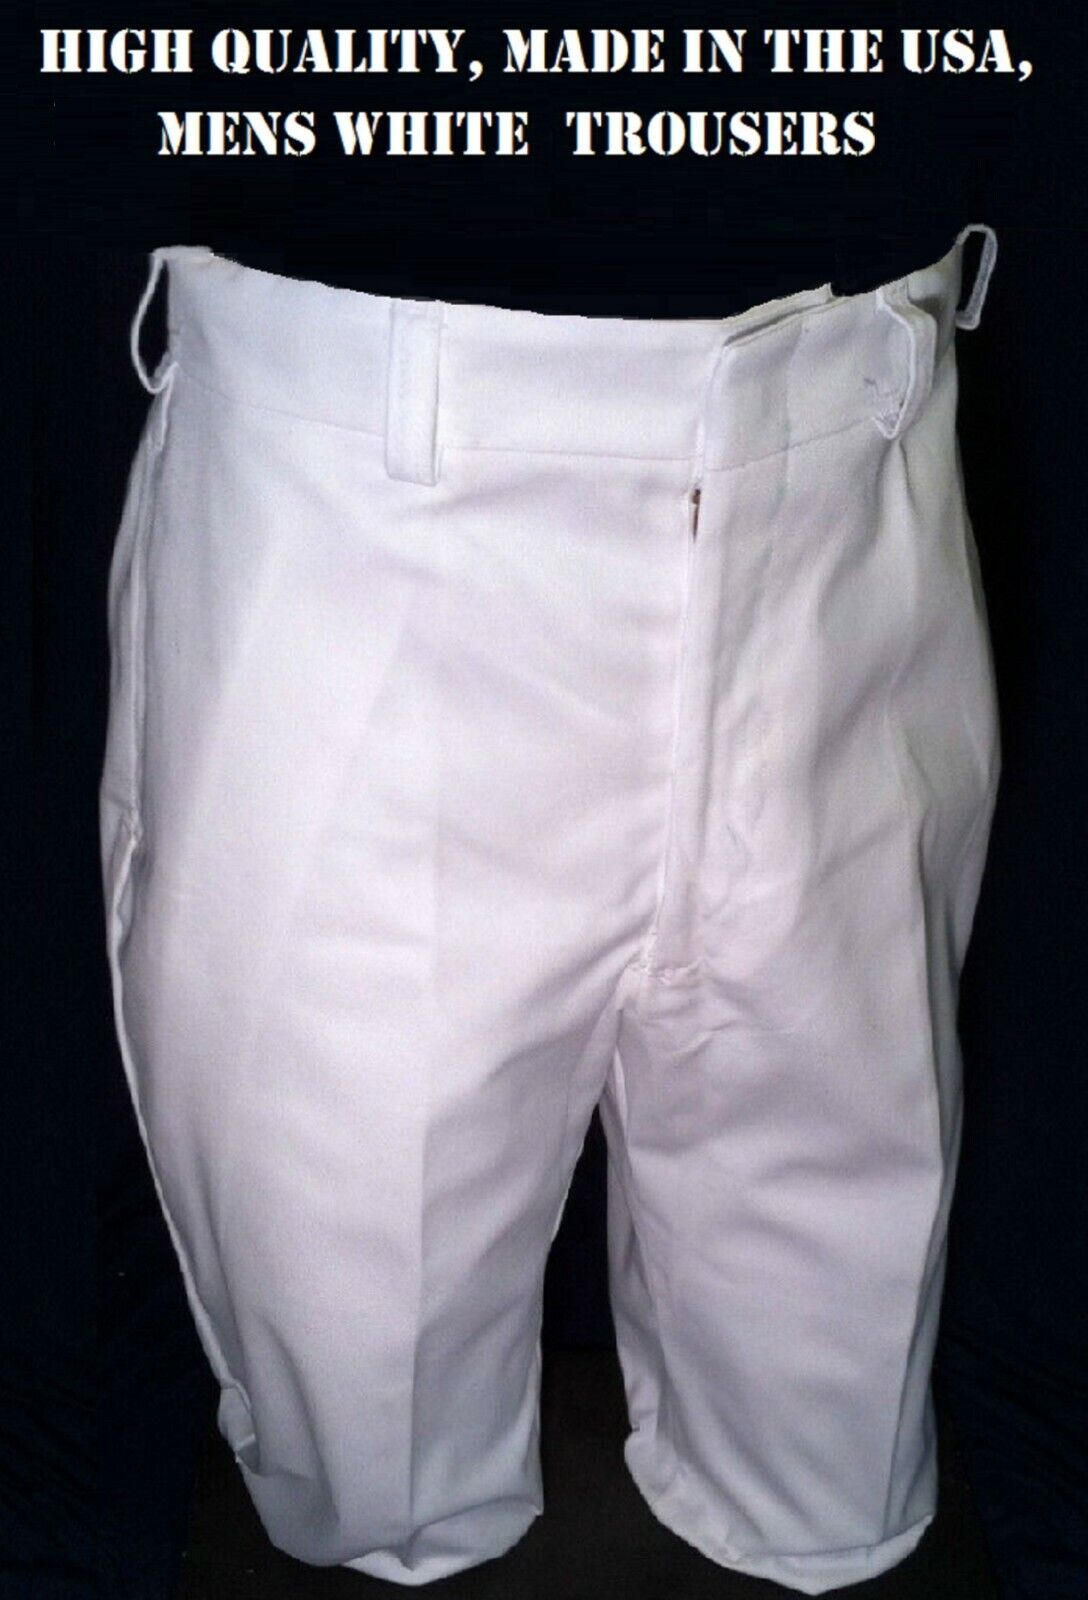 US MILITARY TROUSERS 40x30 HOSPITAL DUTY UNIFORM MEDICAL ASSISTANT WHITE PANTS